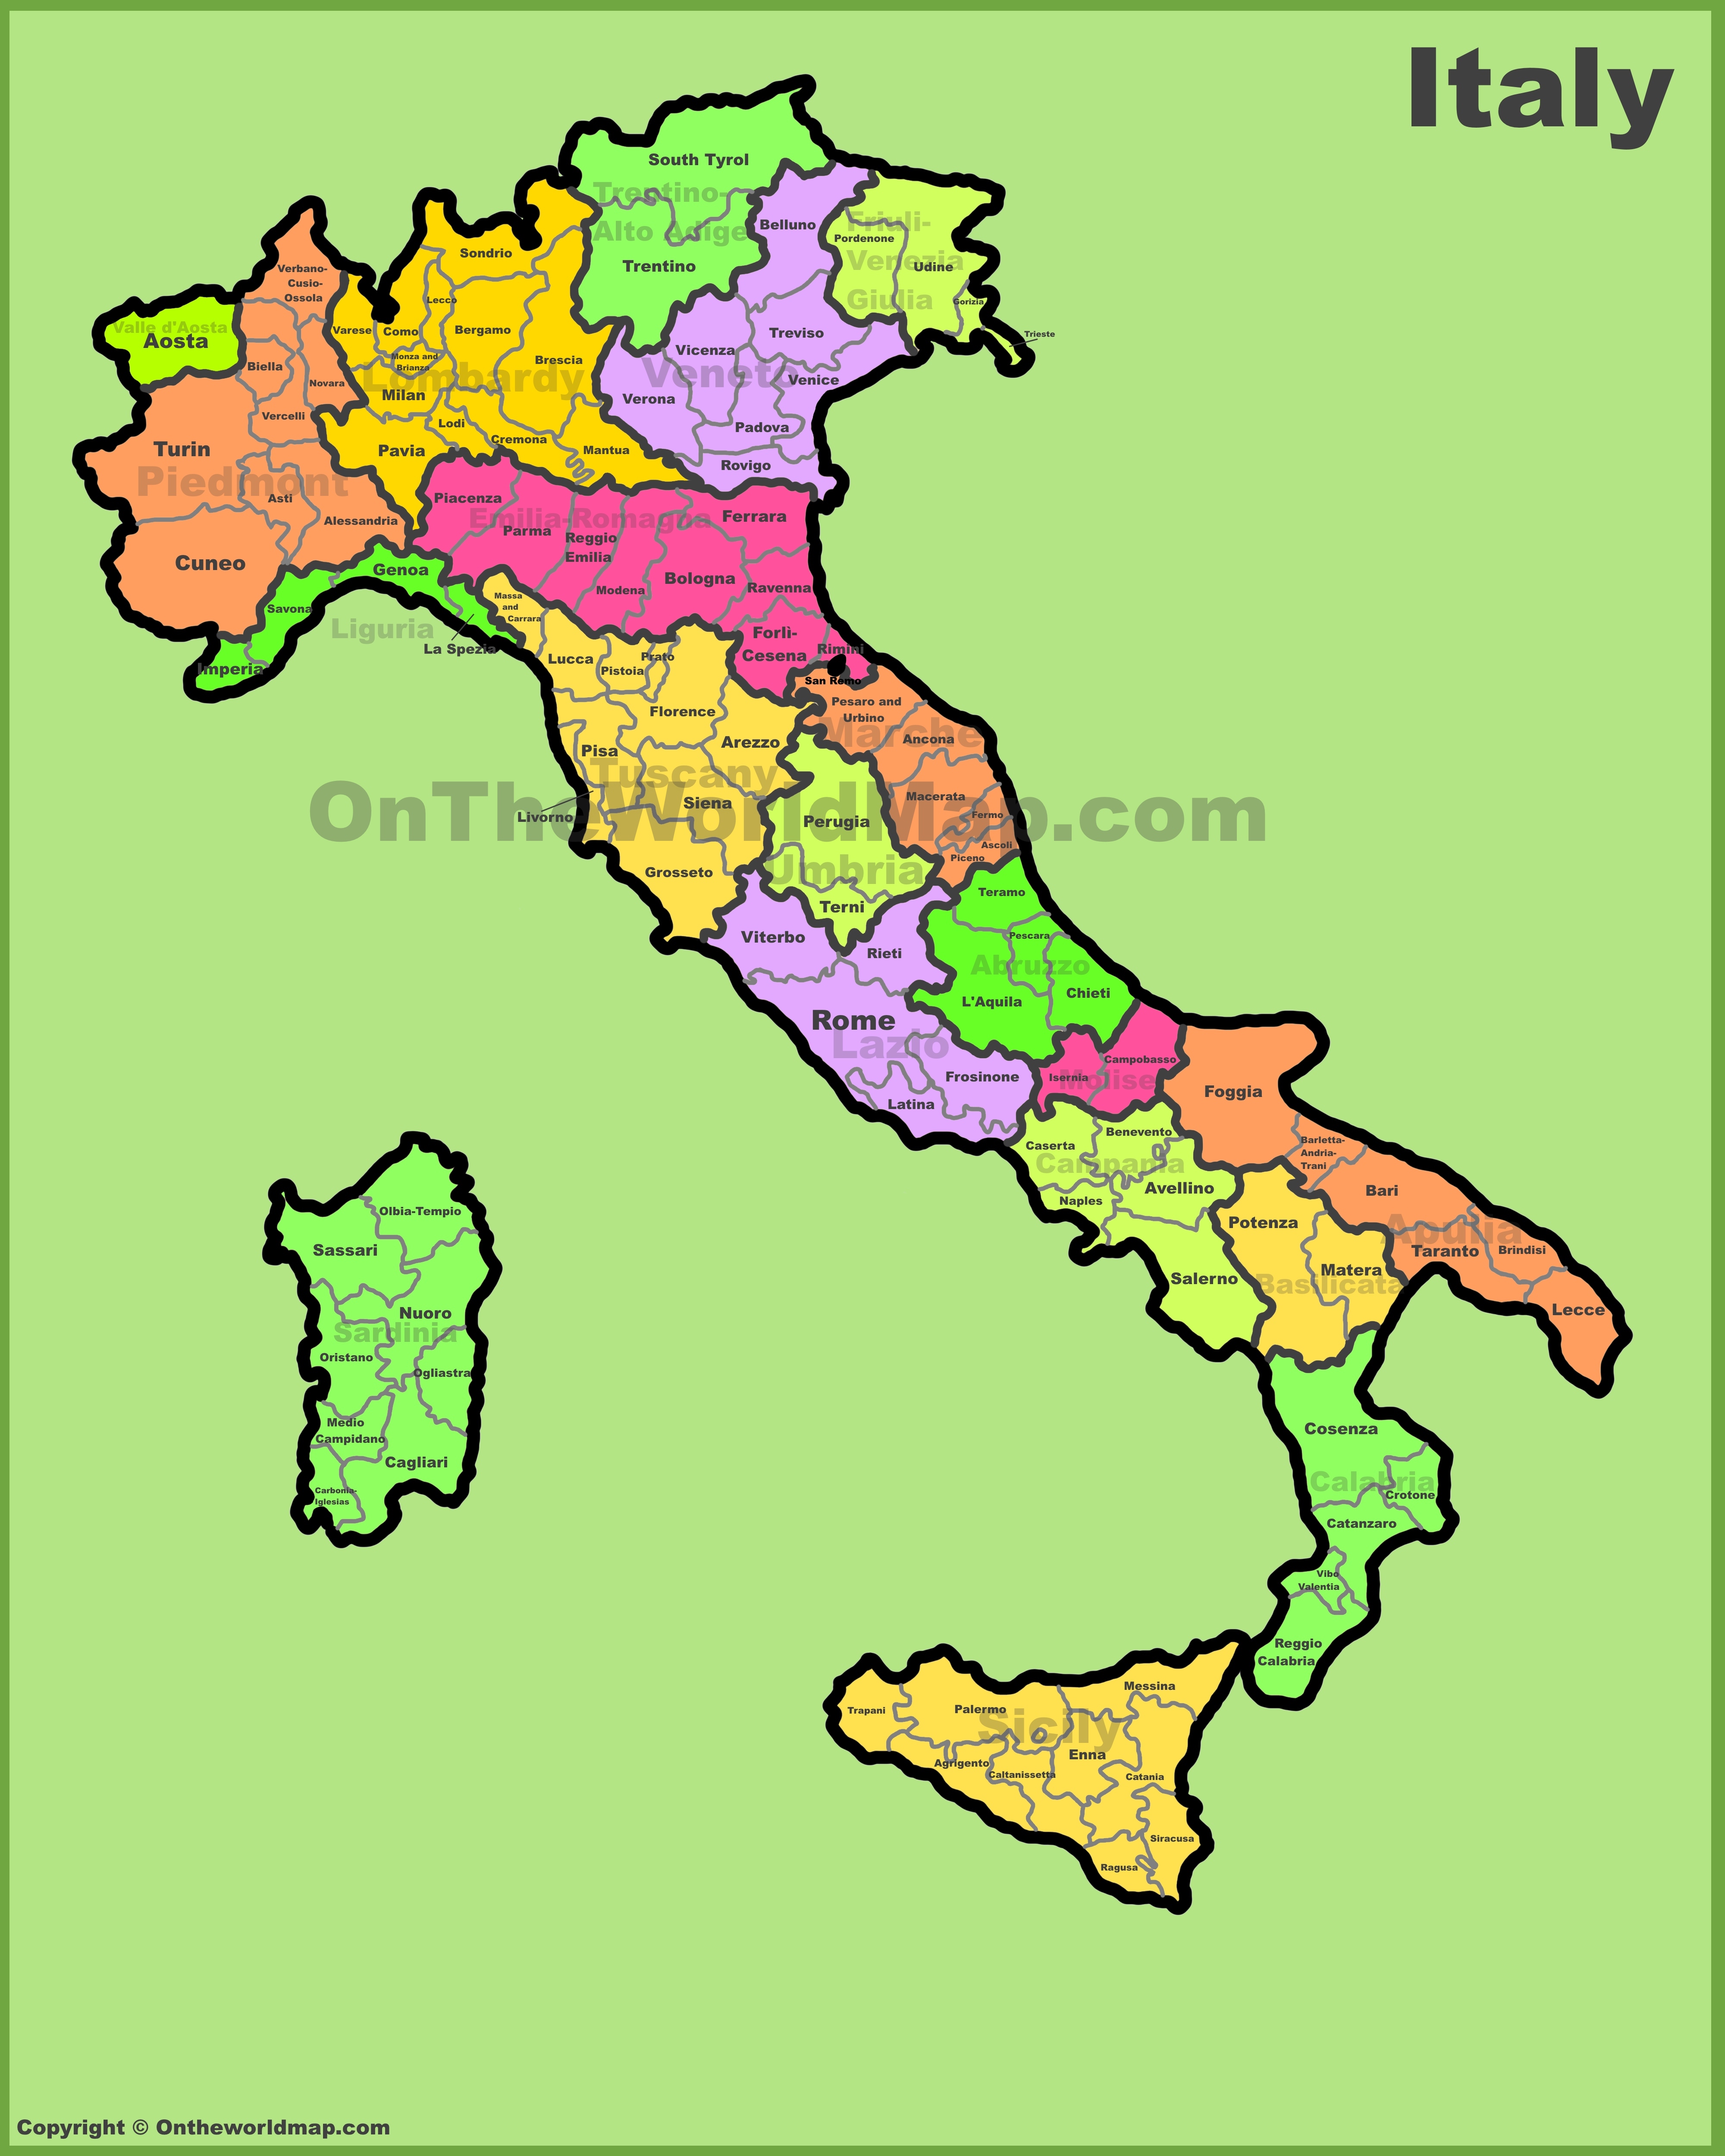 Italy provinces map ﻿